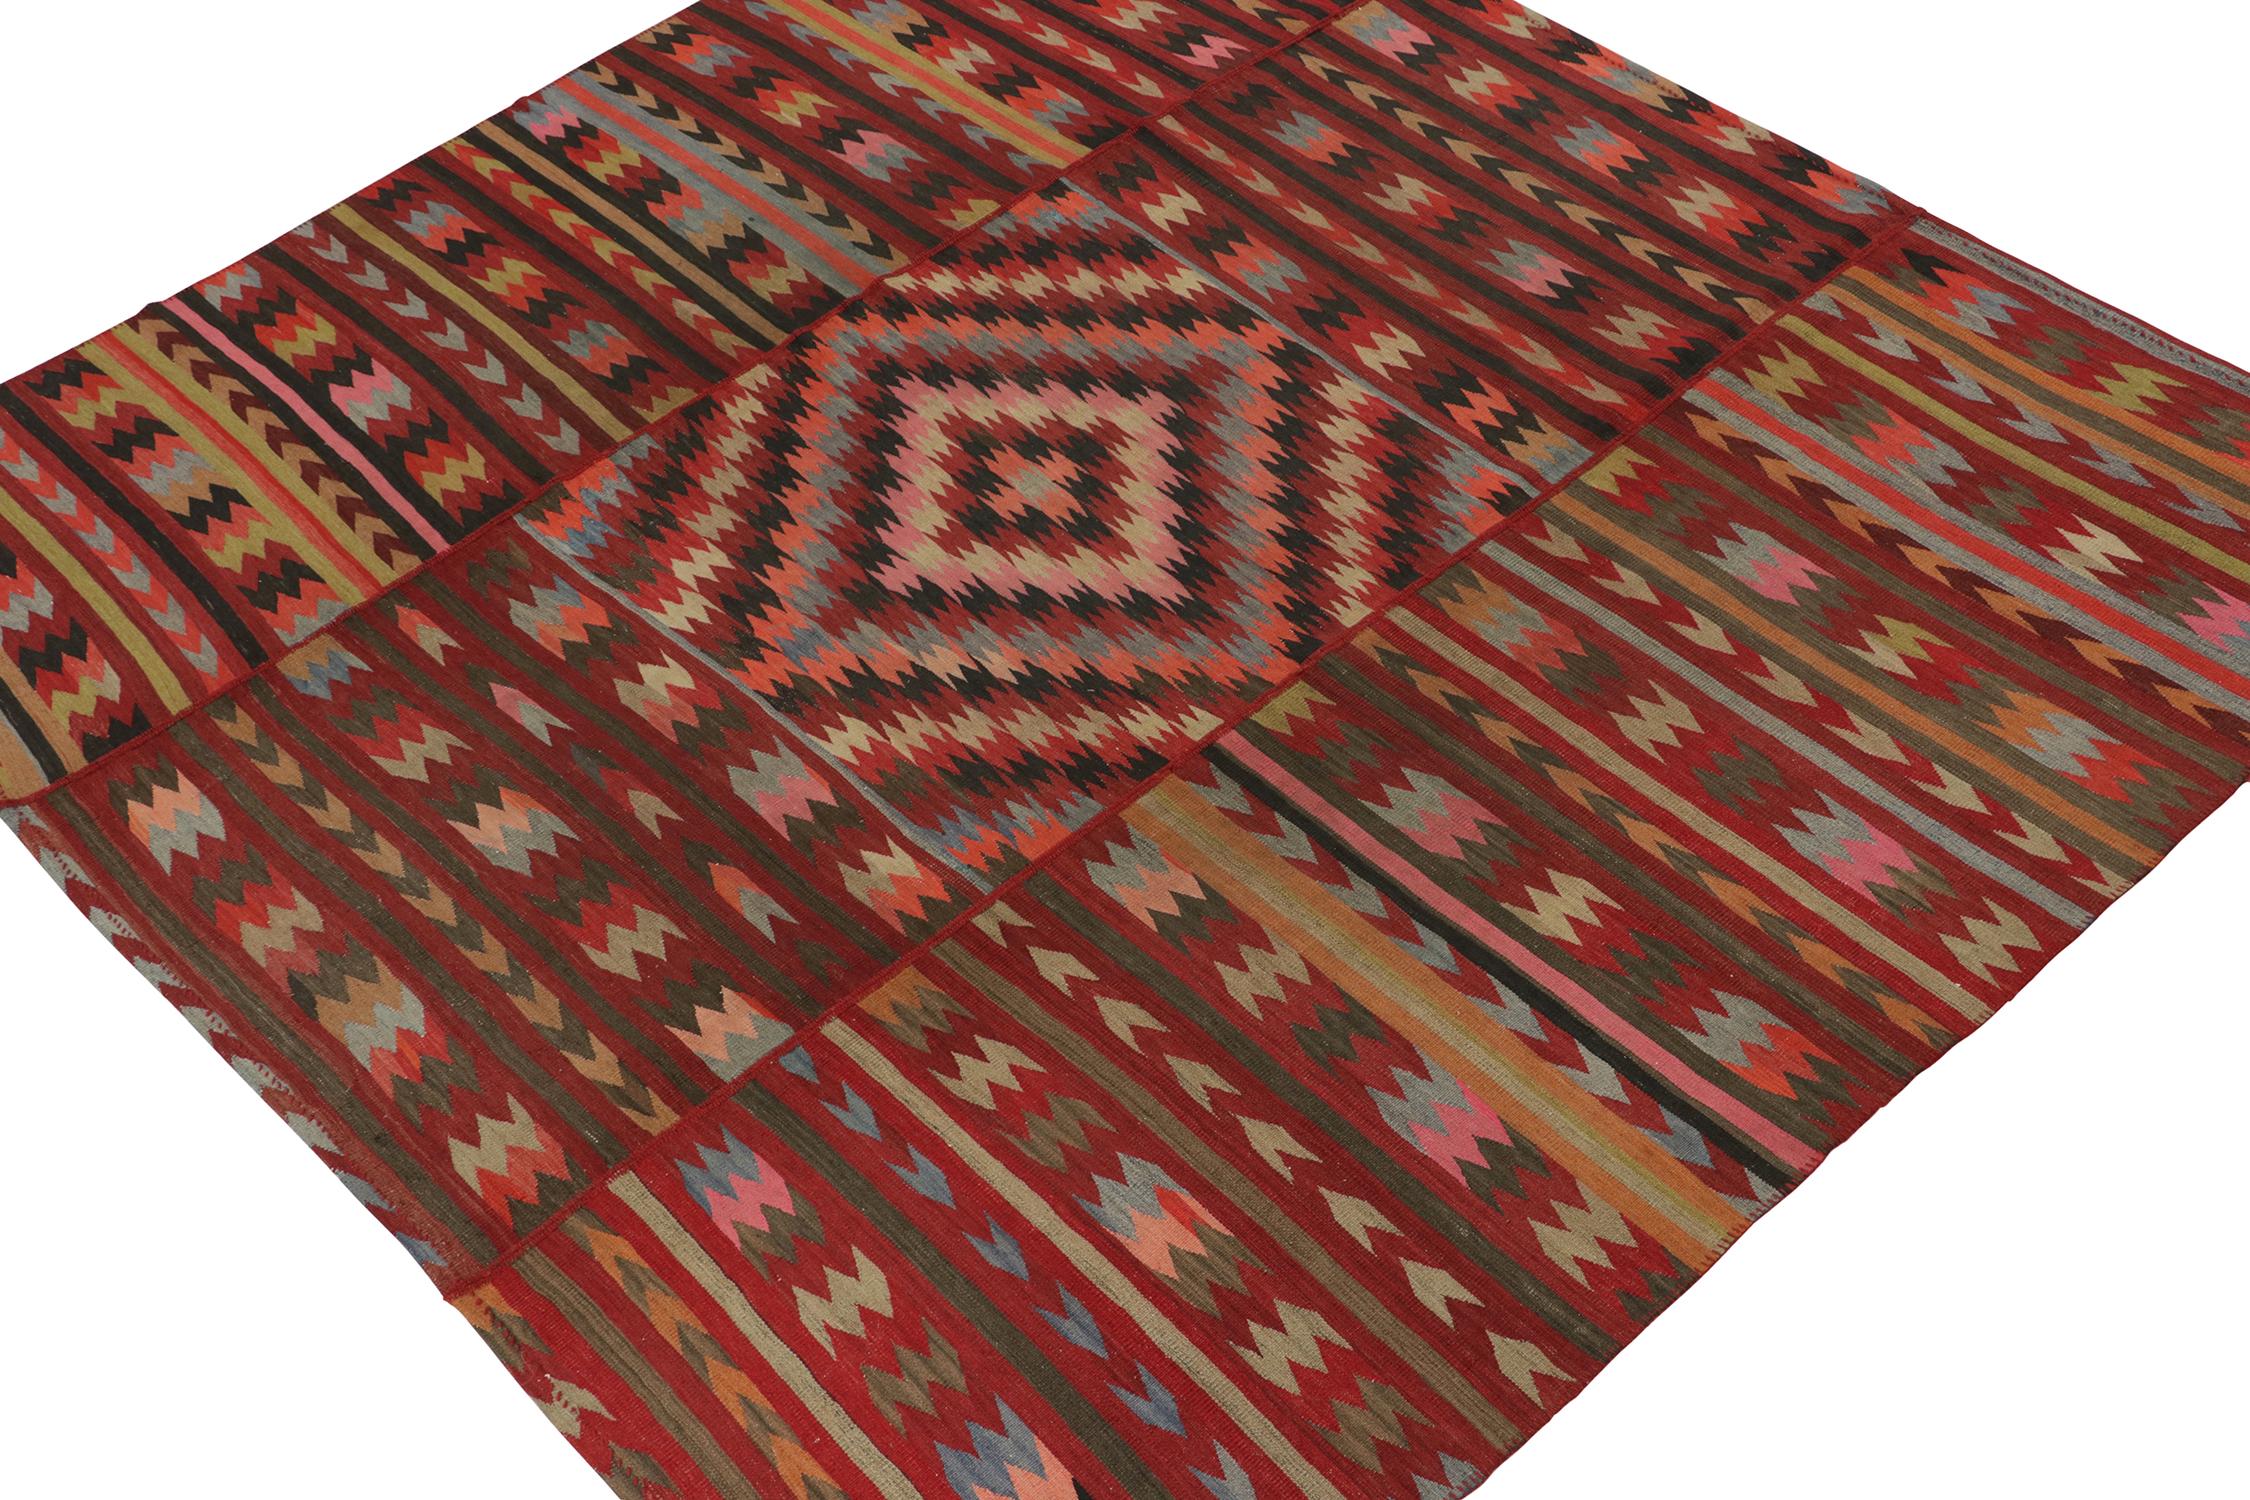 This vintage 8x9 Persian Kilim is an outstanding new addition of Bidjar provenance in Rug & Kilim's rare tribal curations. Handwoven in wool circa 1950-1960.

Further on the Design: 

Bidjar Kilims like this are reputed for their durability and